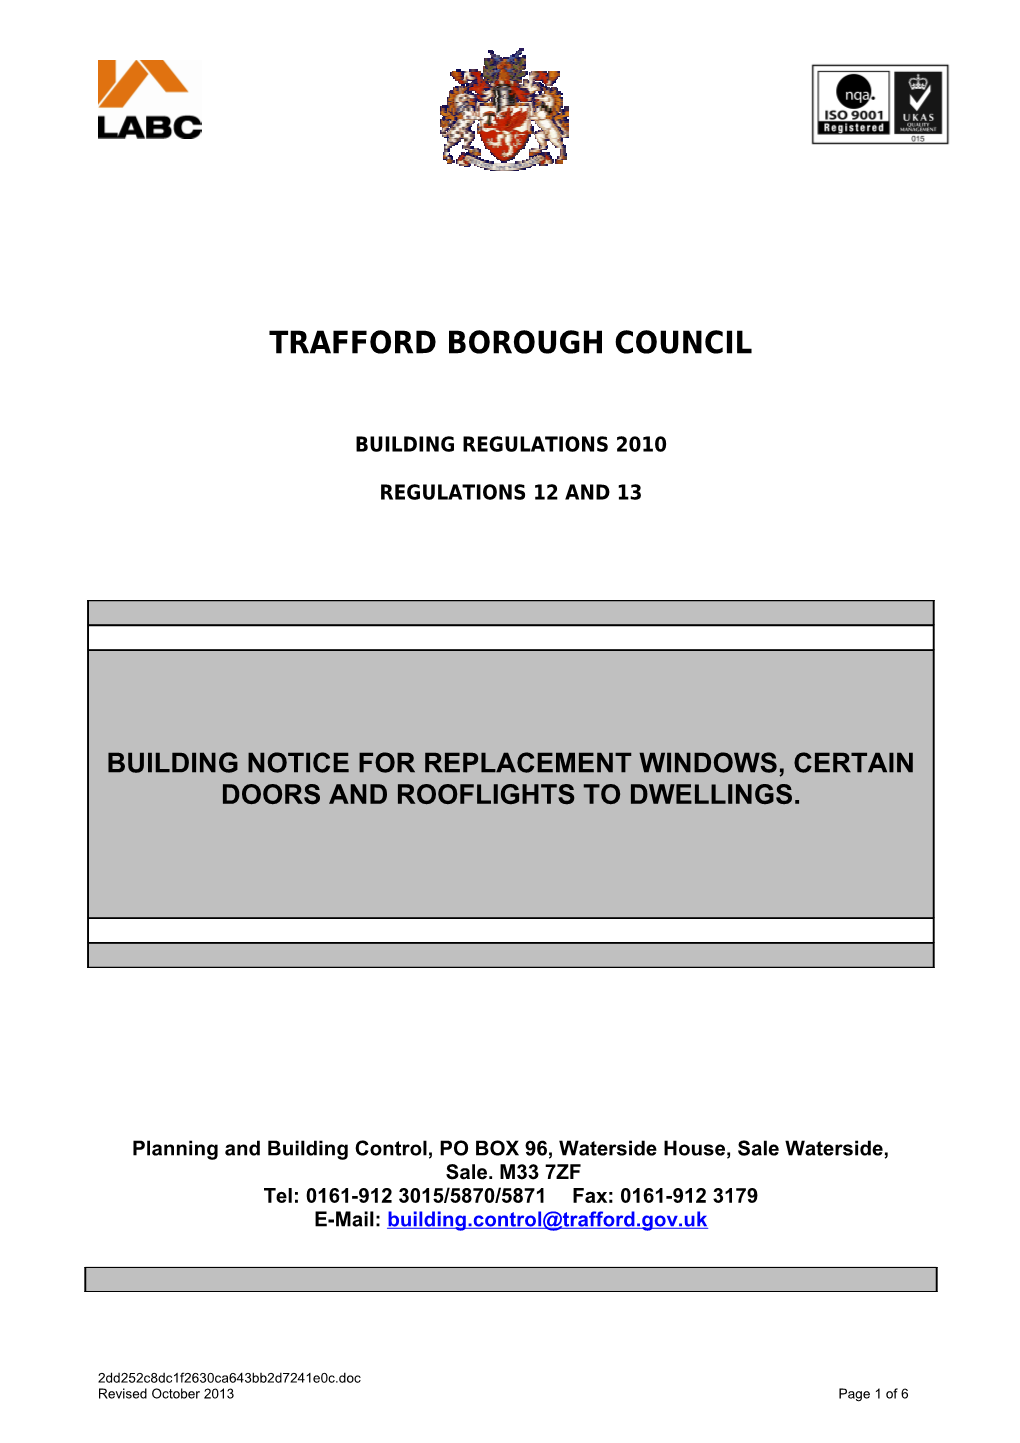 Building Control - Building Notice Application Form (For Replacement Glazing)